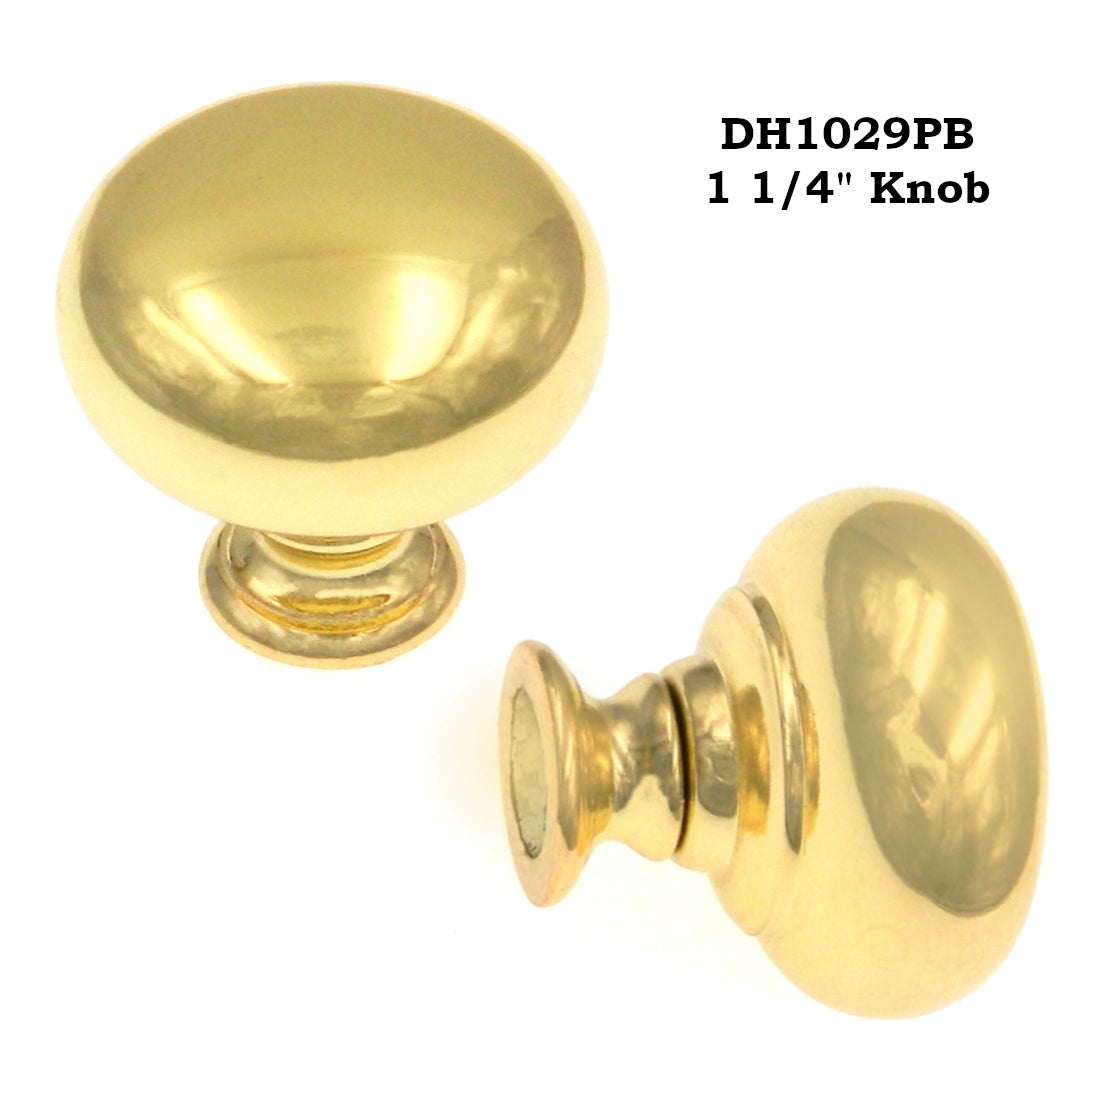 Warwick Contemporary Polished Brass 1 1/4" Smooth Cabinet Knob Pull DH1029PB